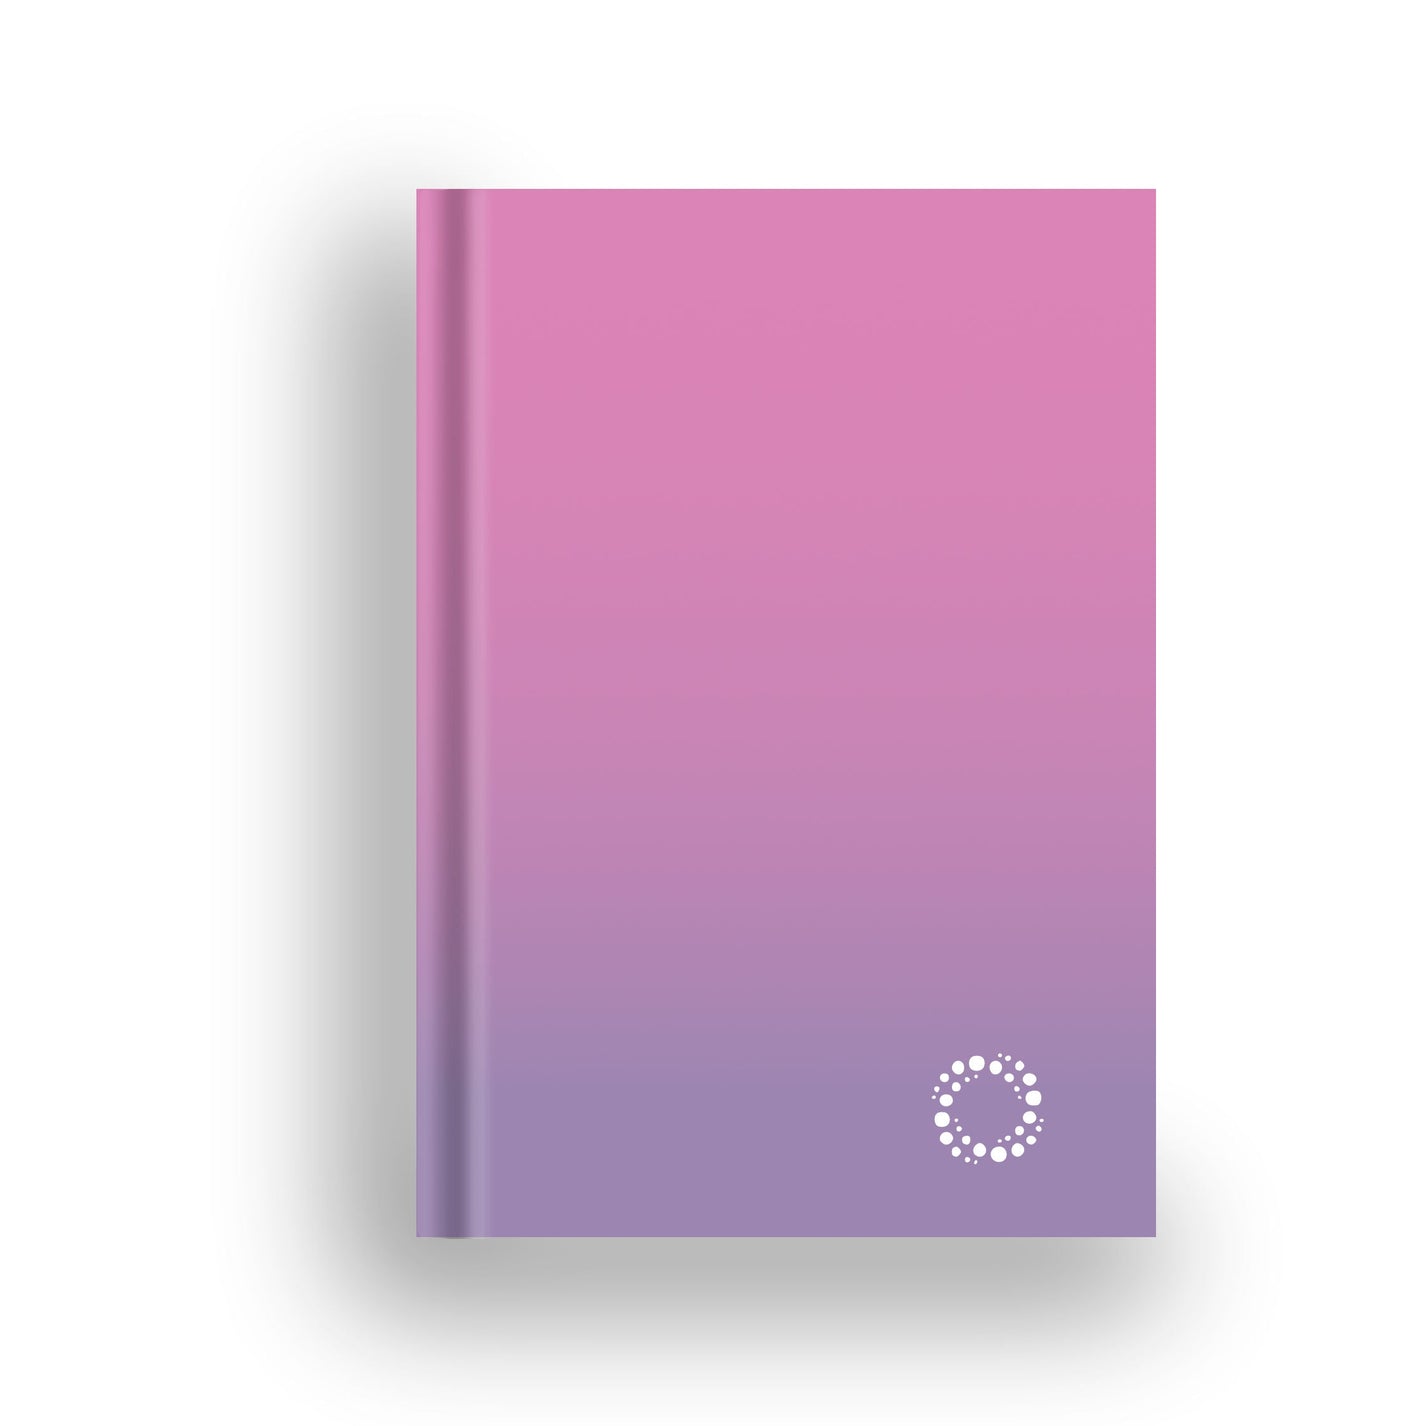 DayDot Journals Colour Fade Blossom and Periwinkle - A5 Hardcover Notebook